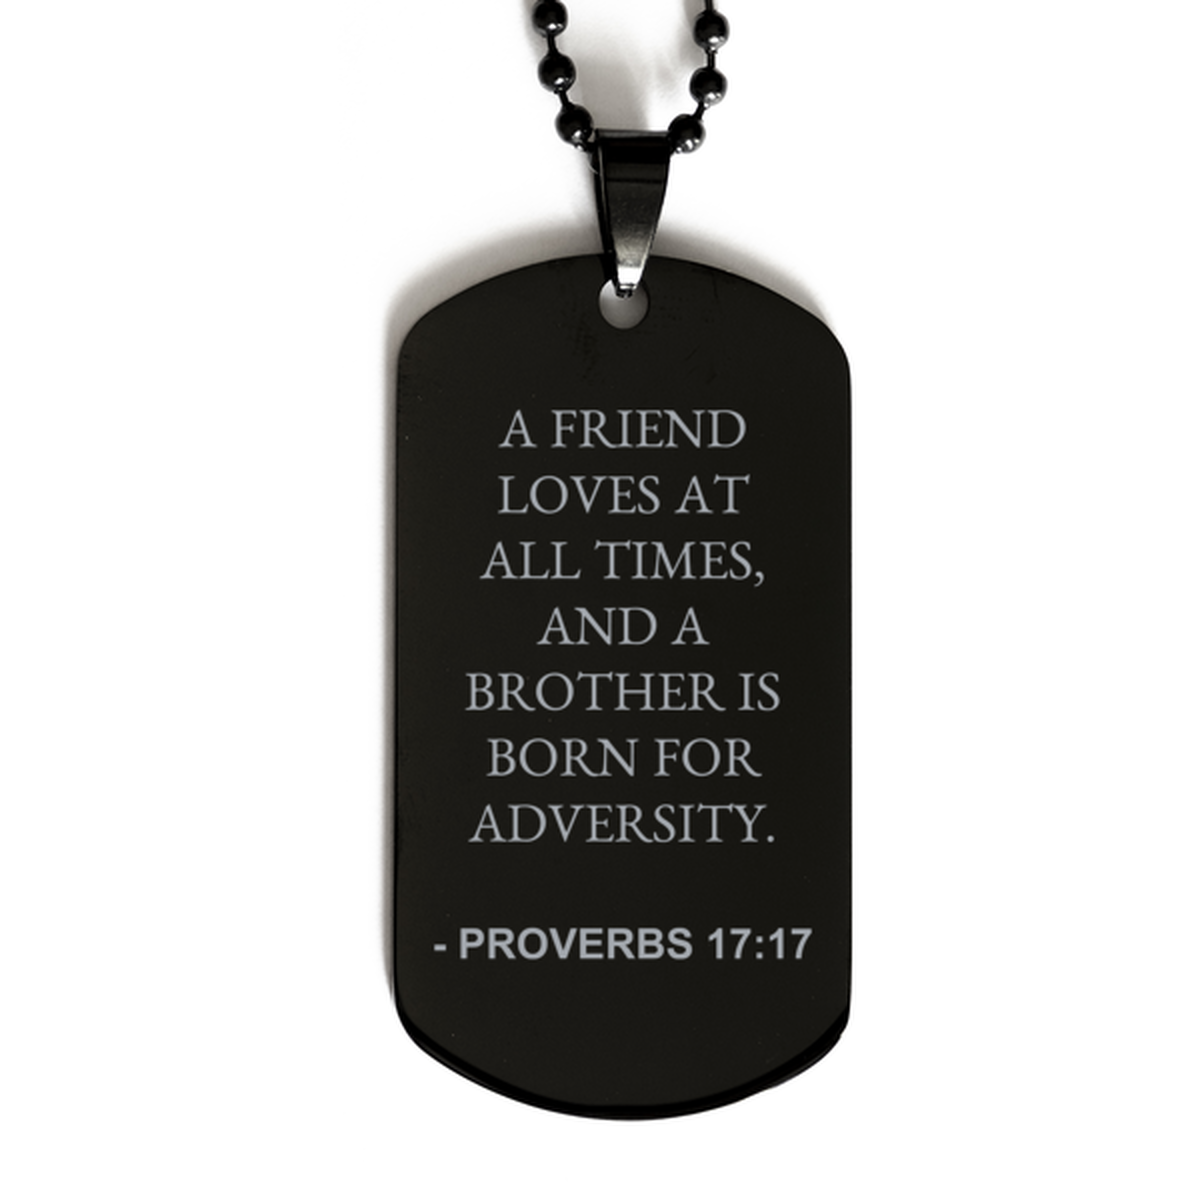 Bible Verse Black Dog Tag, Proverbs 17:17 A Friend Loves At All Times And A Brother Is, Christian Inspirational Necklace Gifts For Men Women